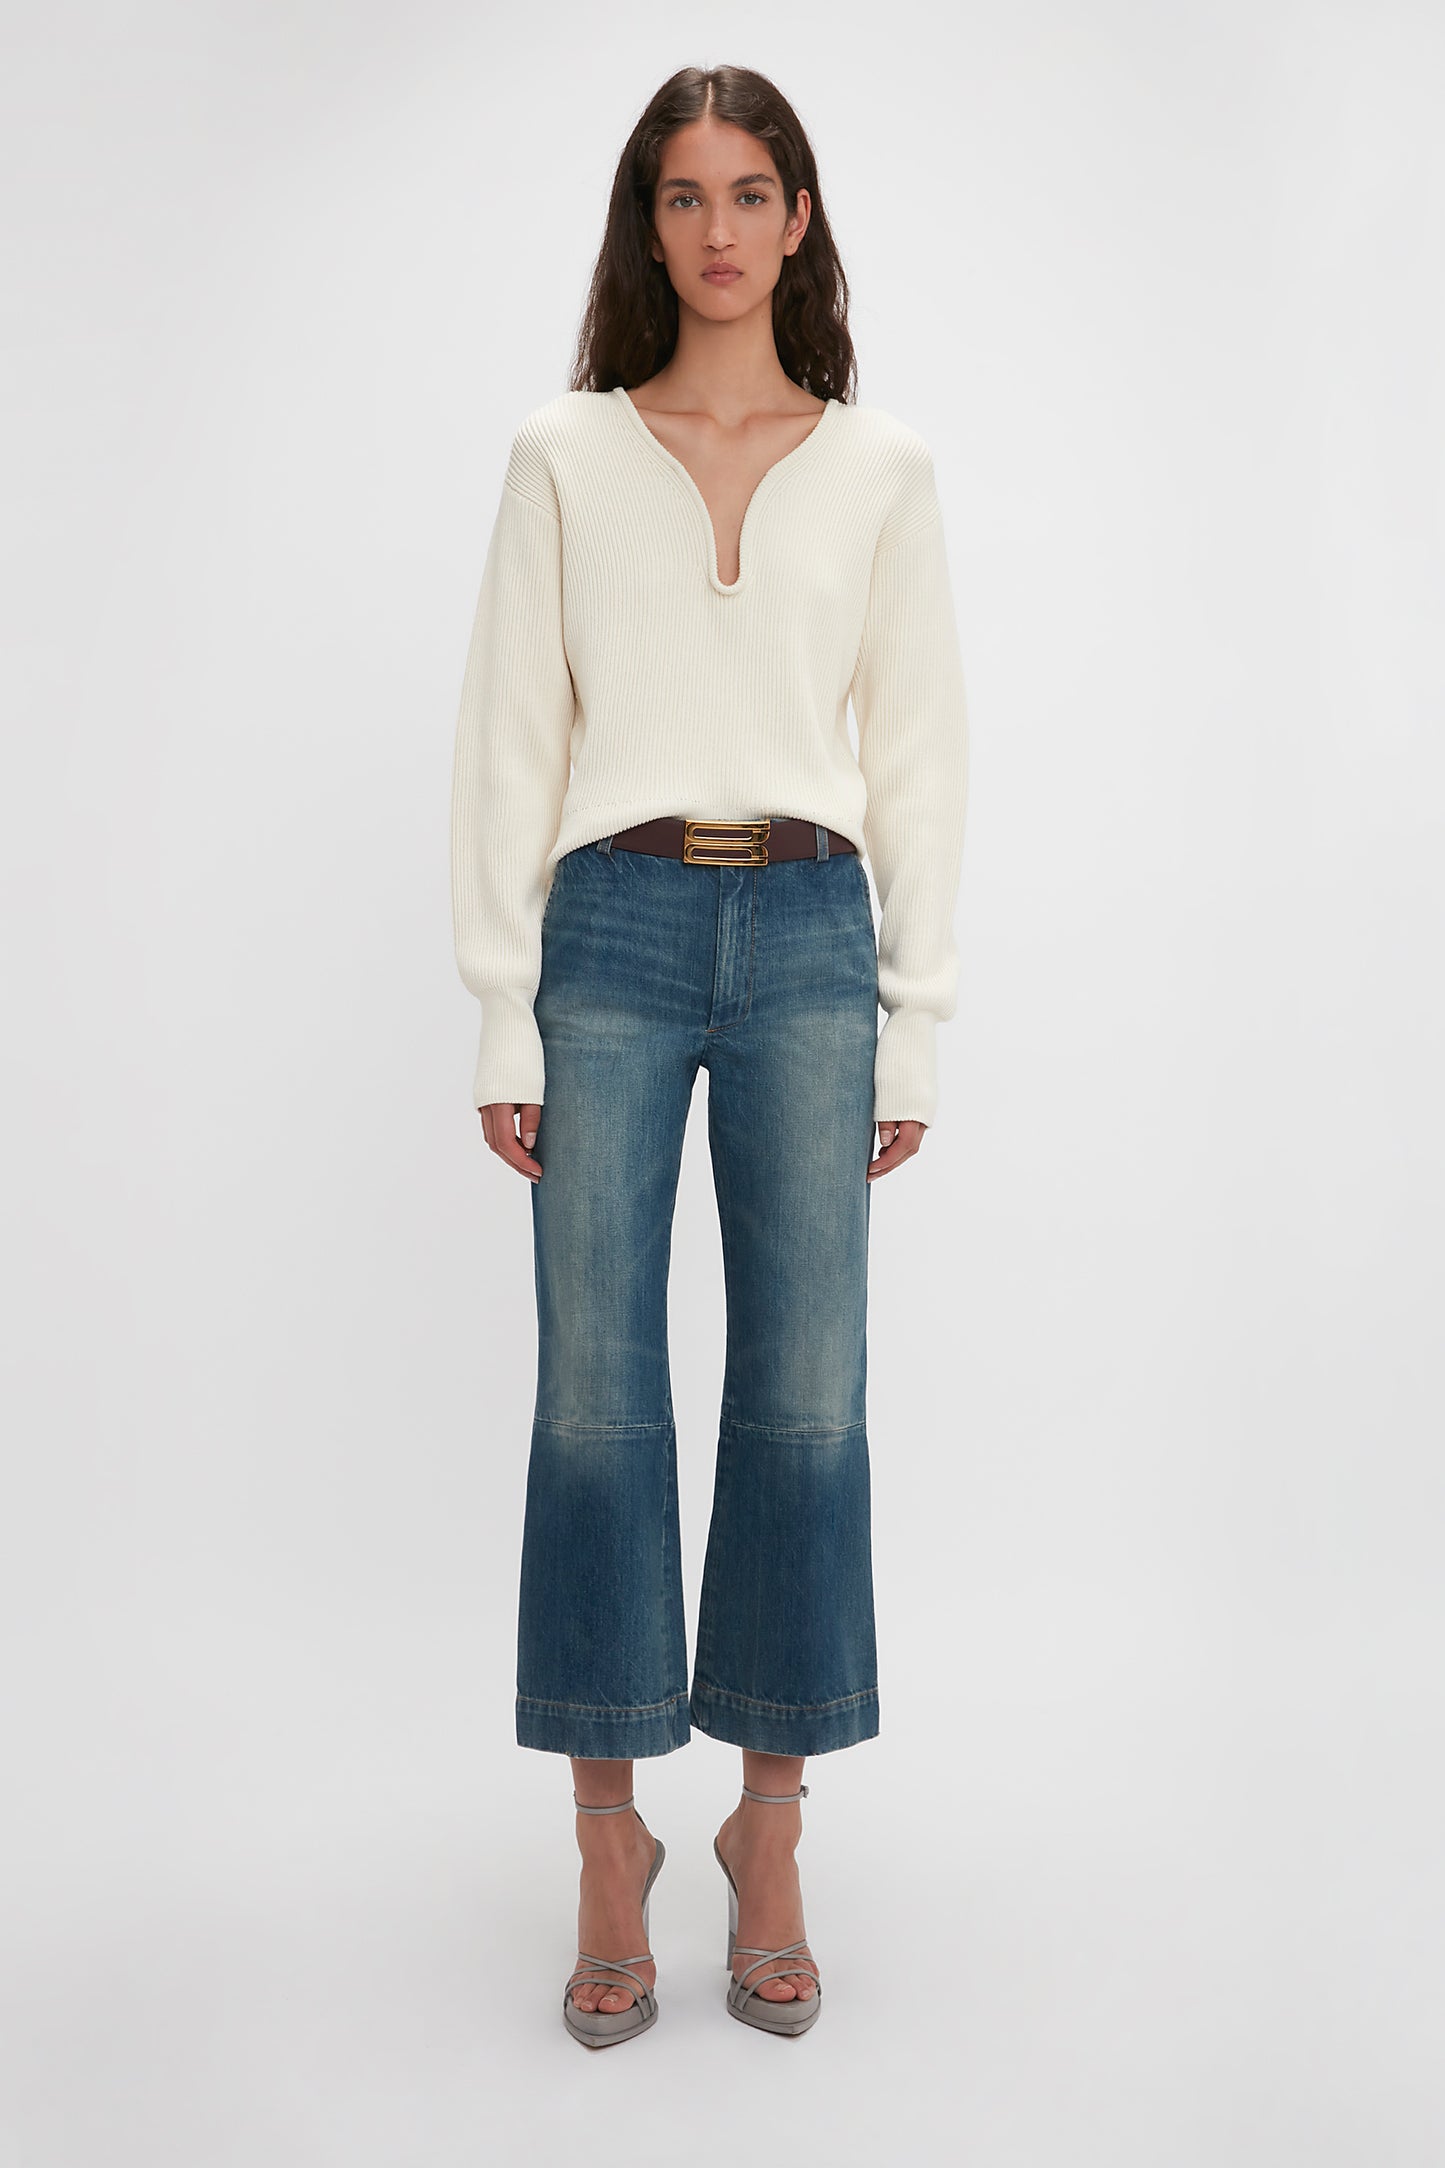 A woman in a white v-neck sweater and Victoria Beckham Cropped Kick Jean In Indigrey Wash stands on a plain background, facing the camera.